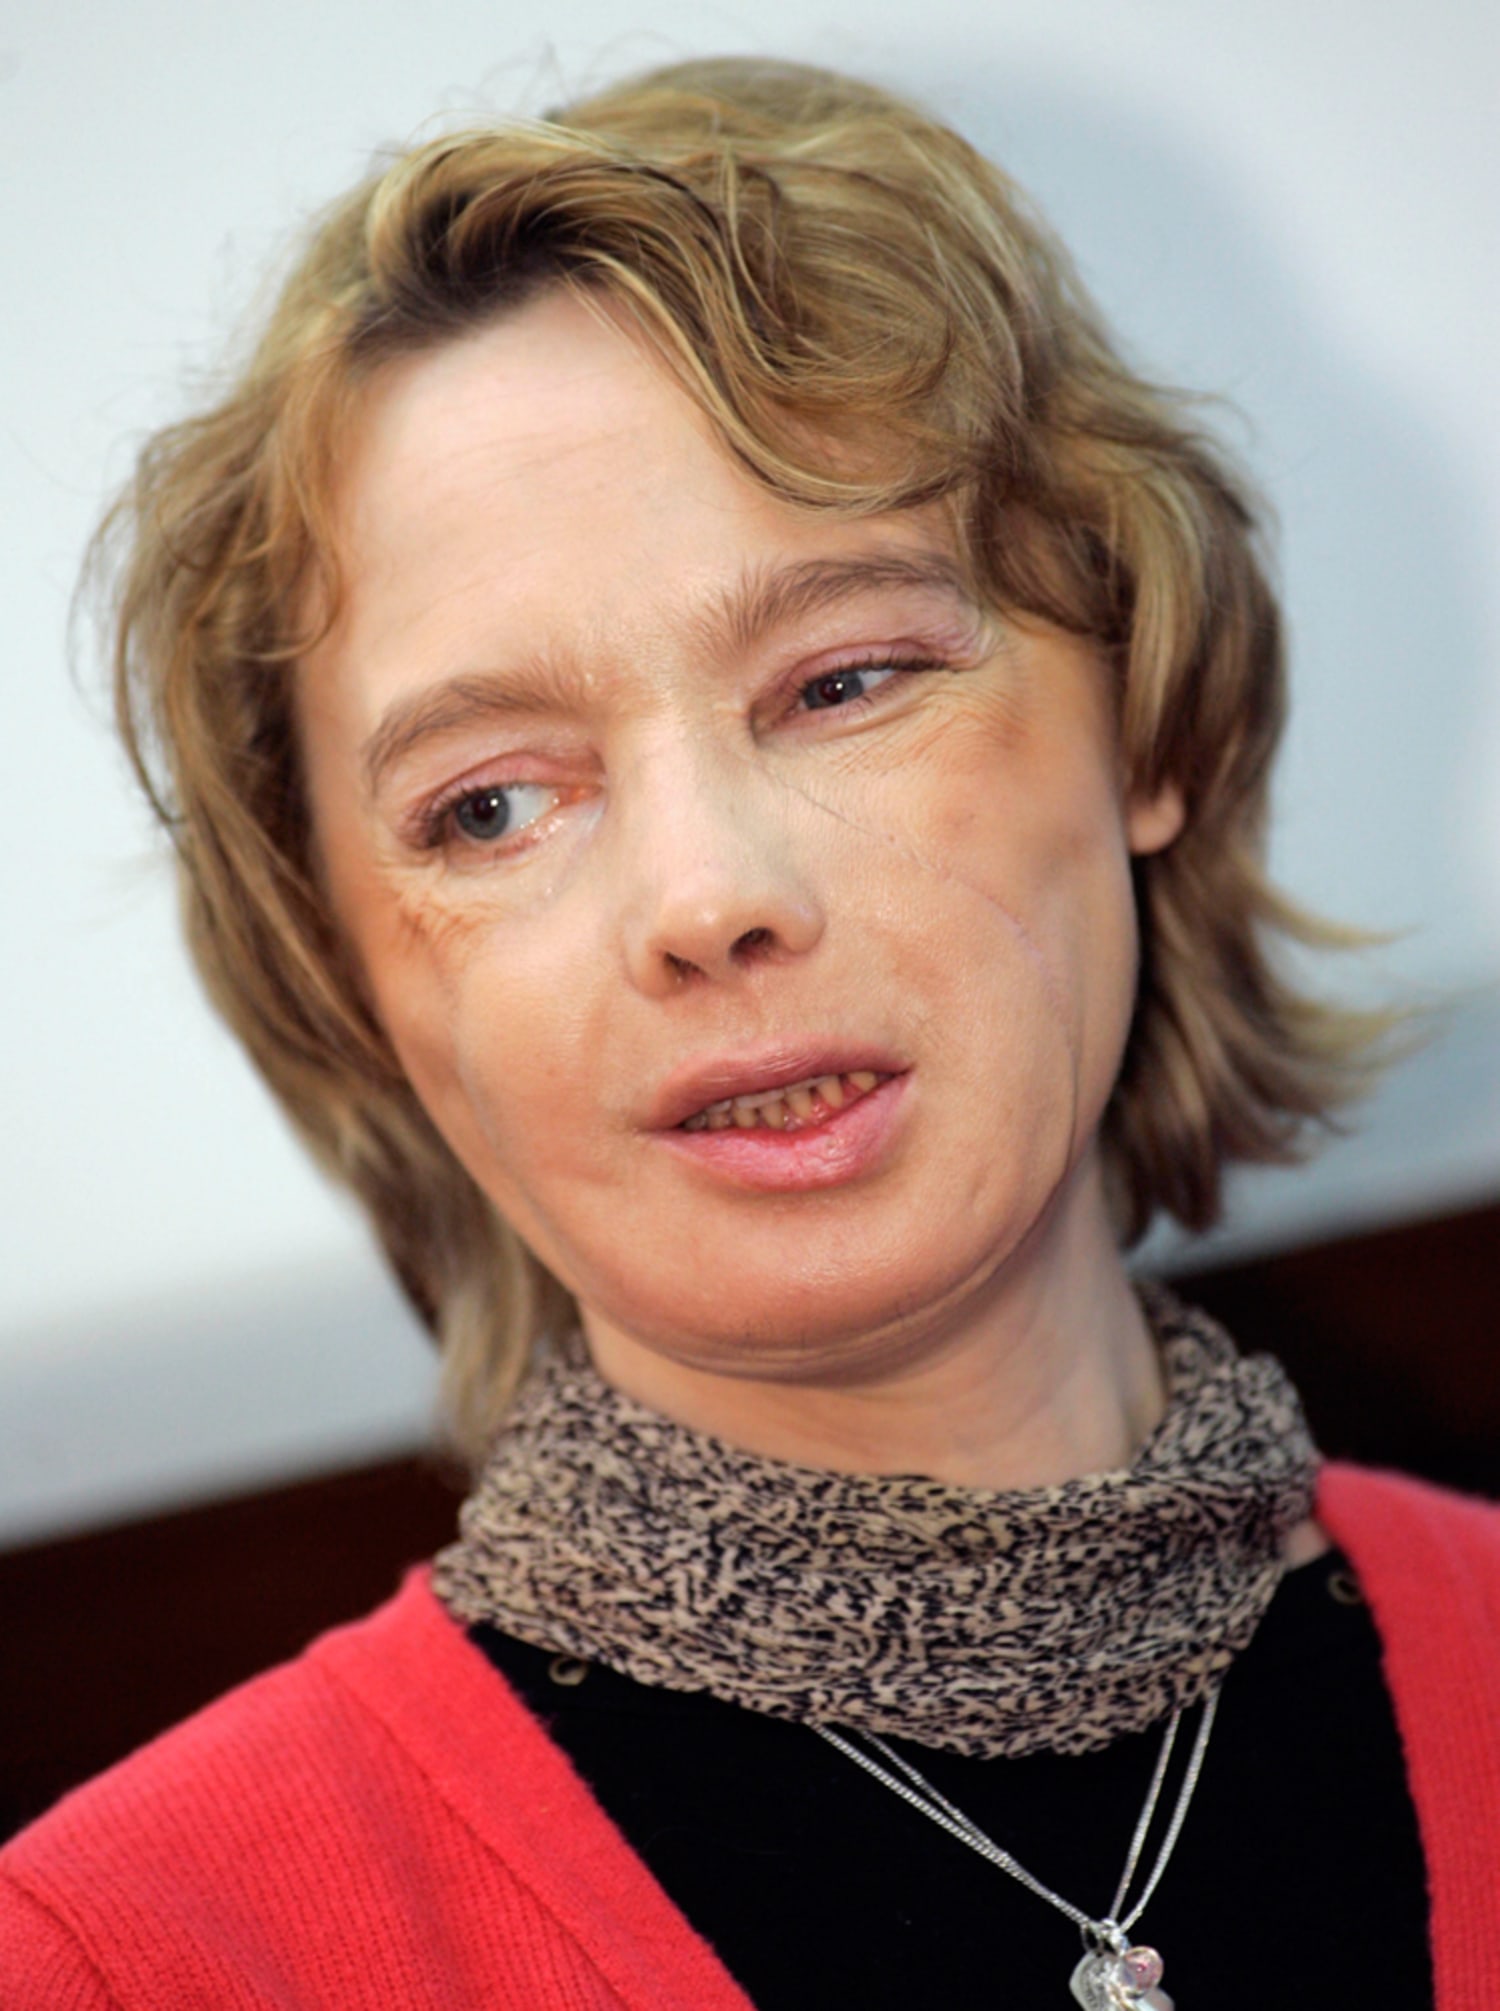 5 months later, face transplant has 'total feeling